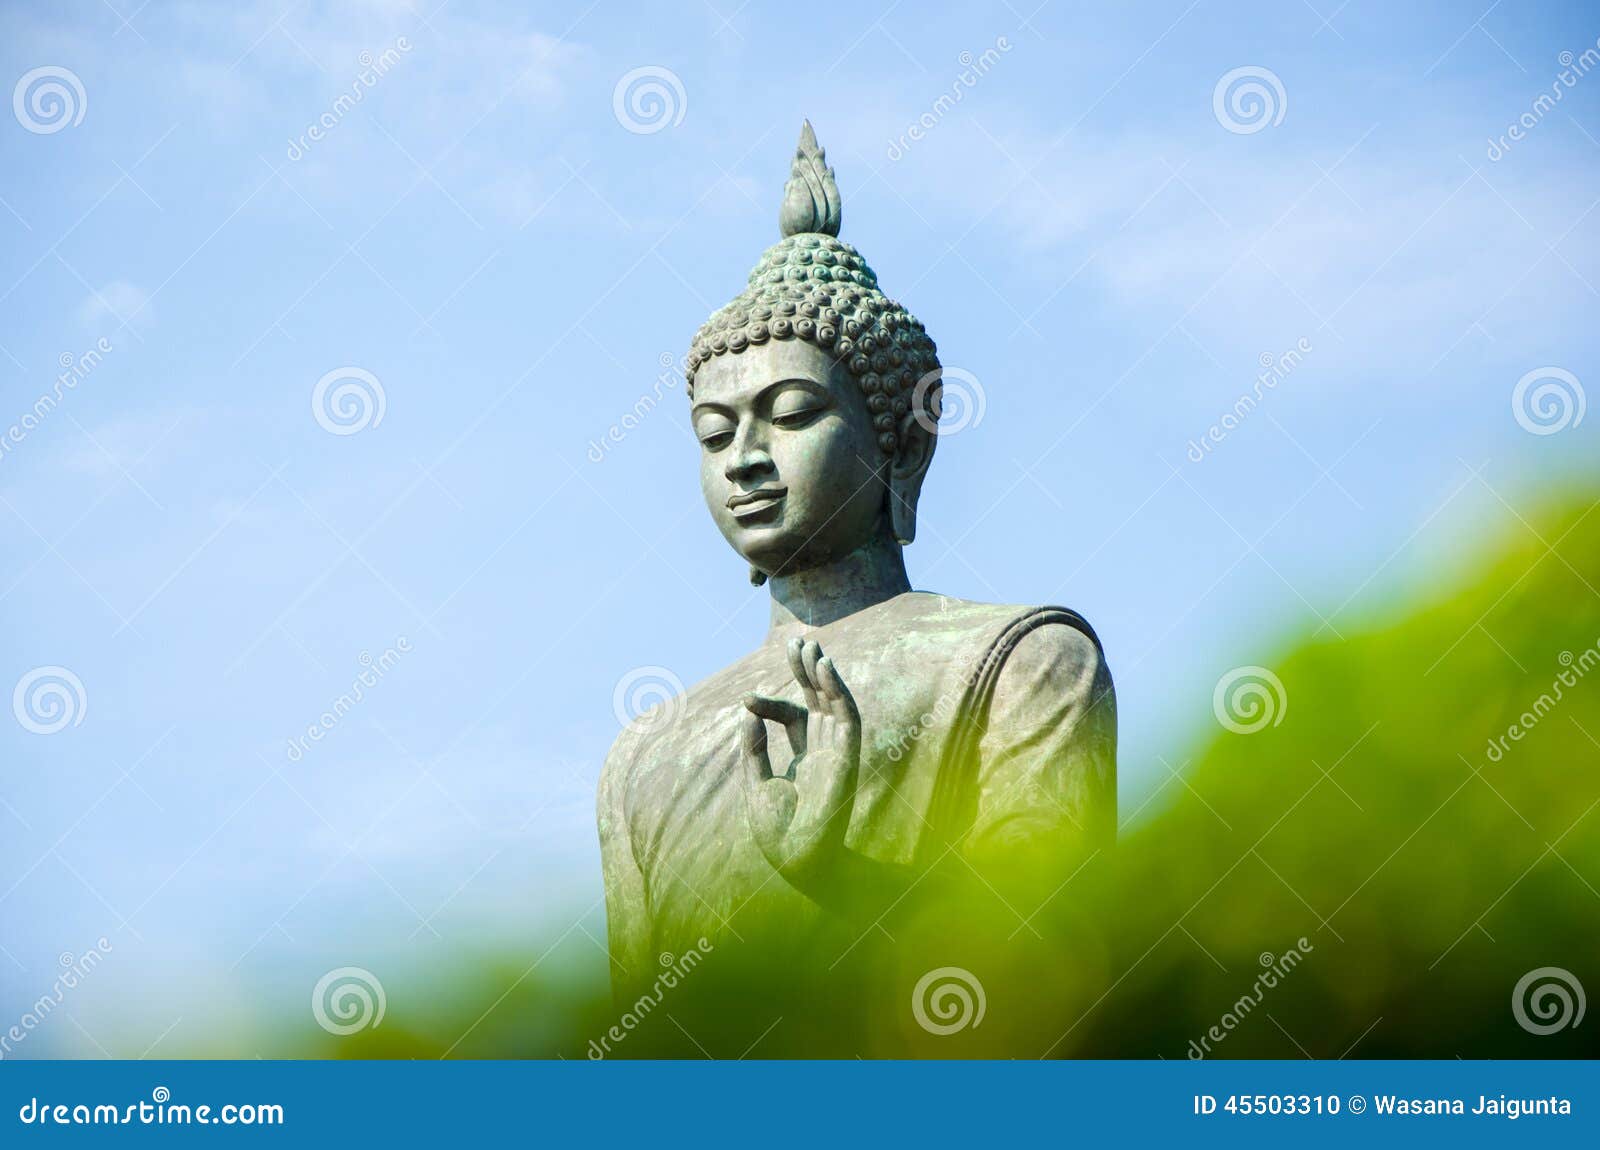 Statue of Buddha at peace stock photo. Image of sculpture - 45503310